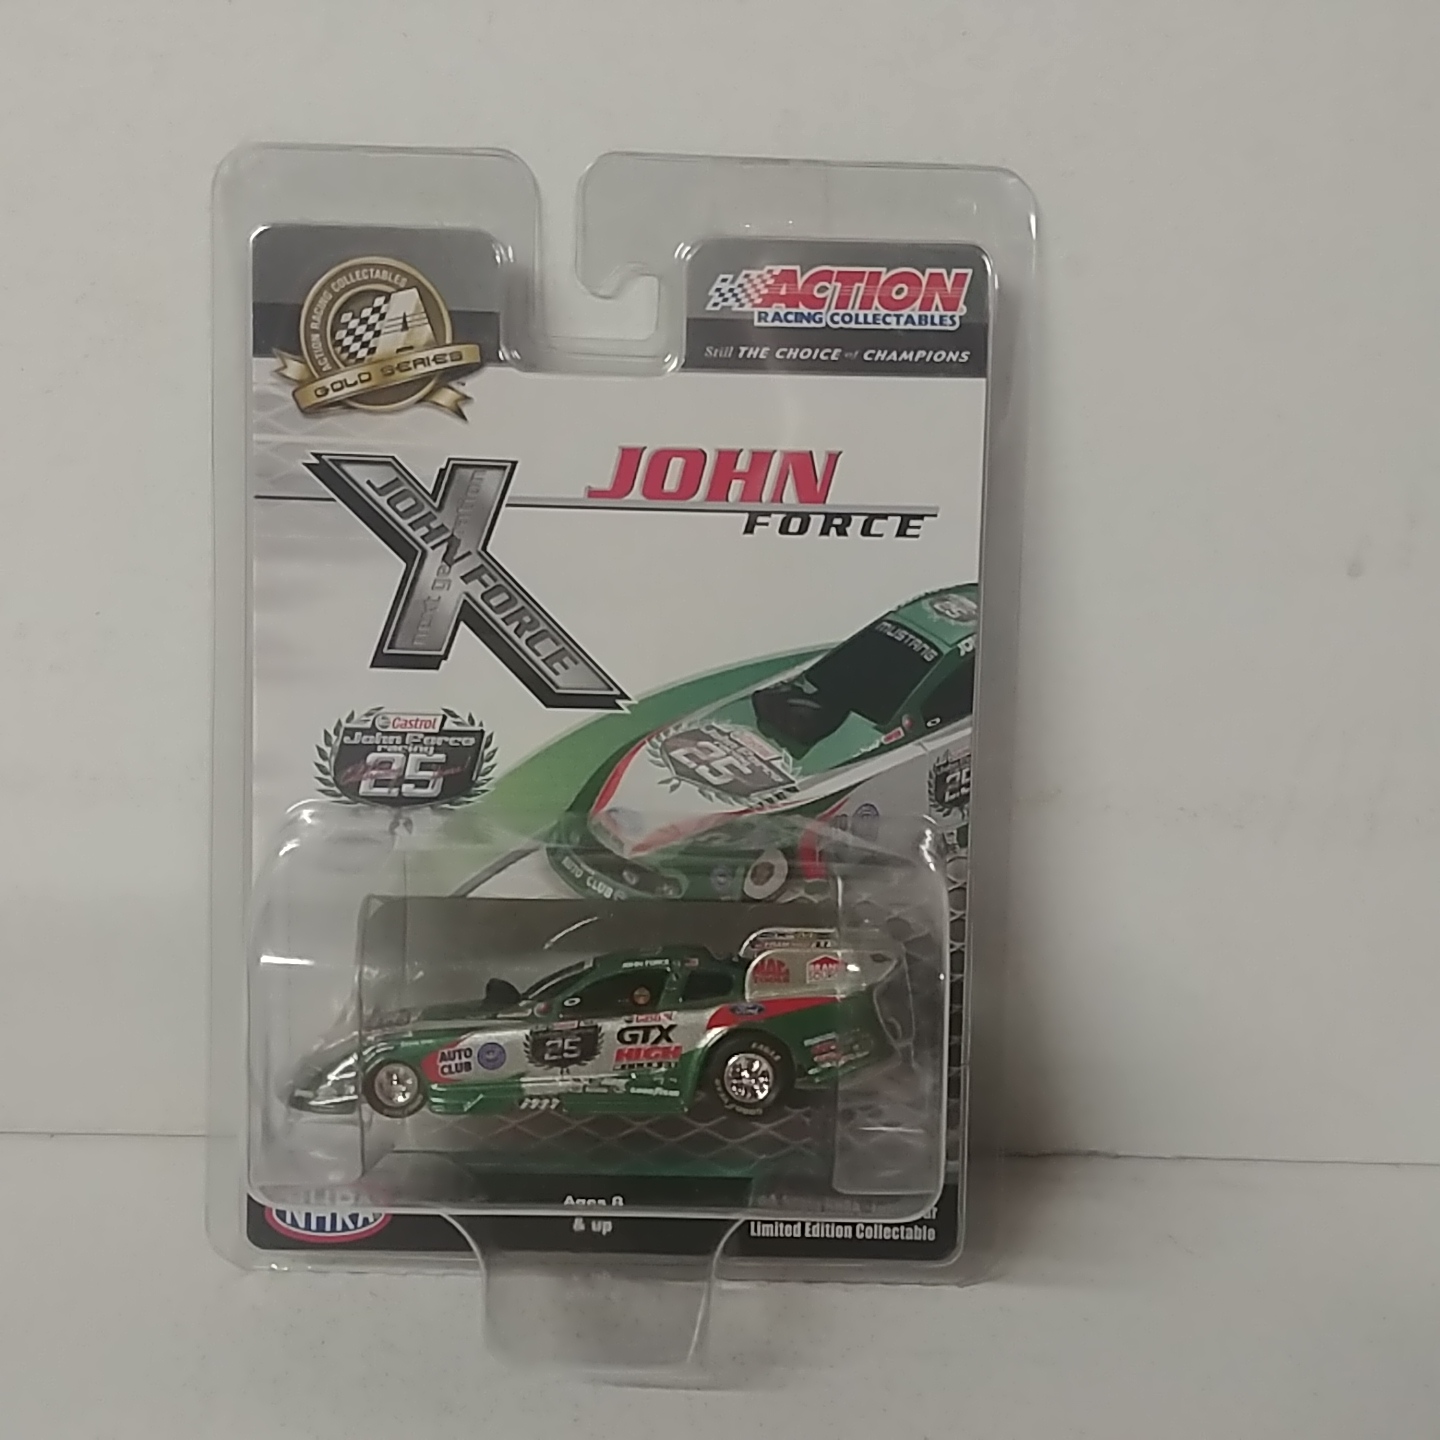 2010 John Force 1/64th Castrol "25th Anniversary" Pitstop Series funny car